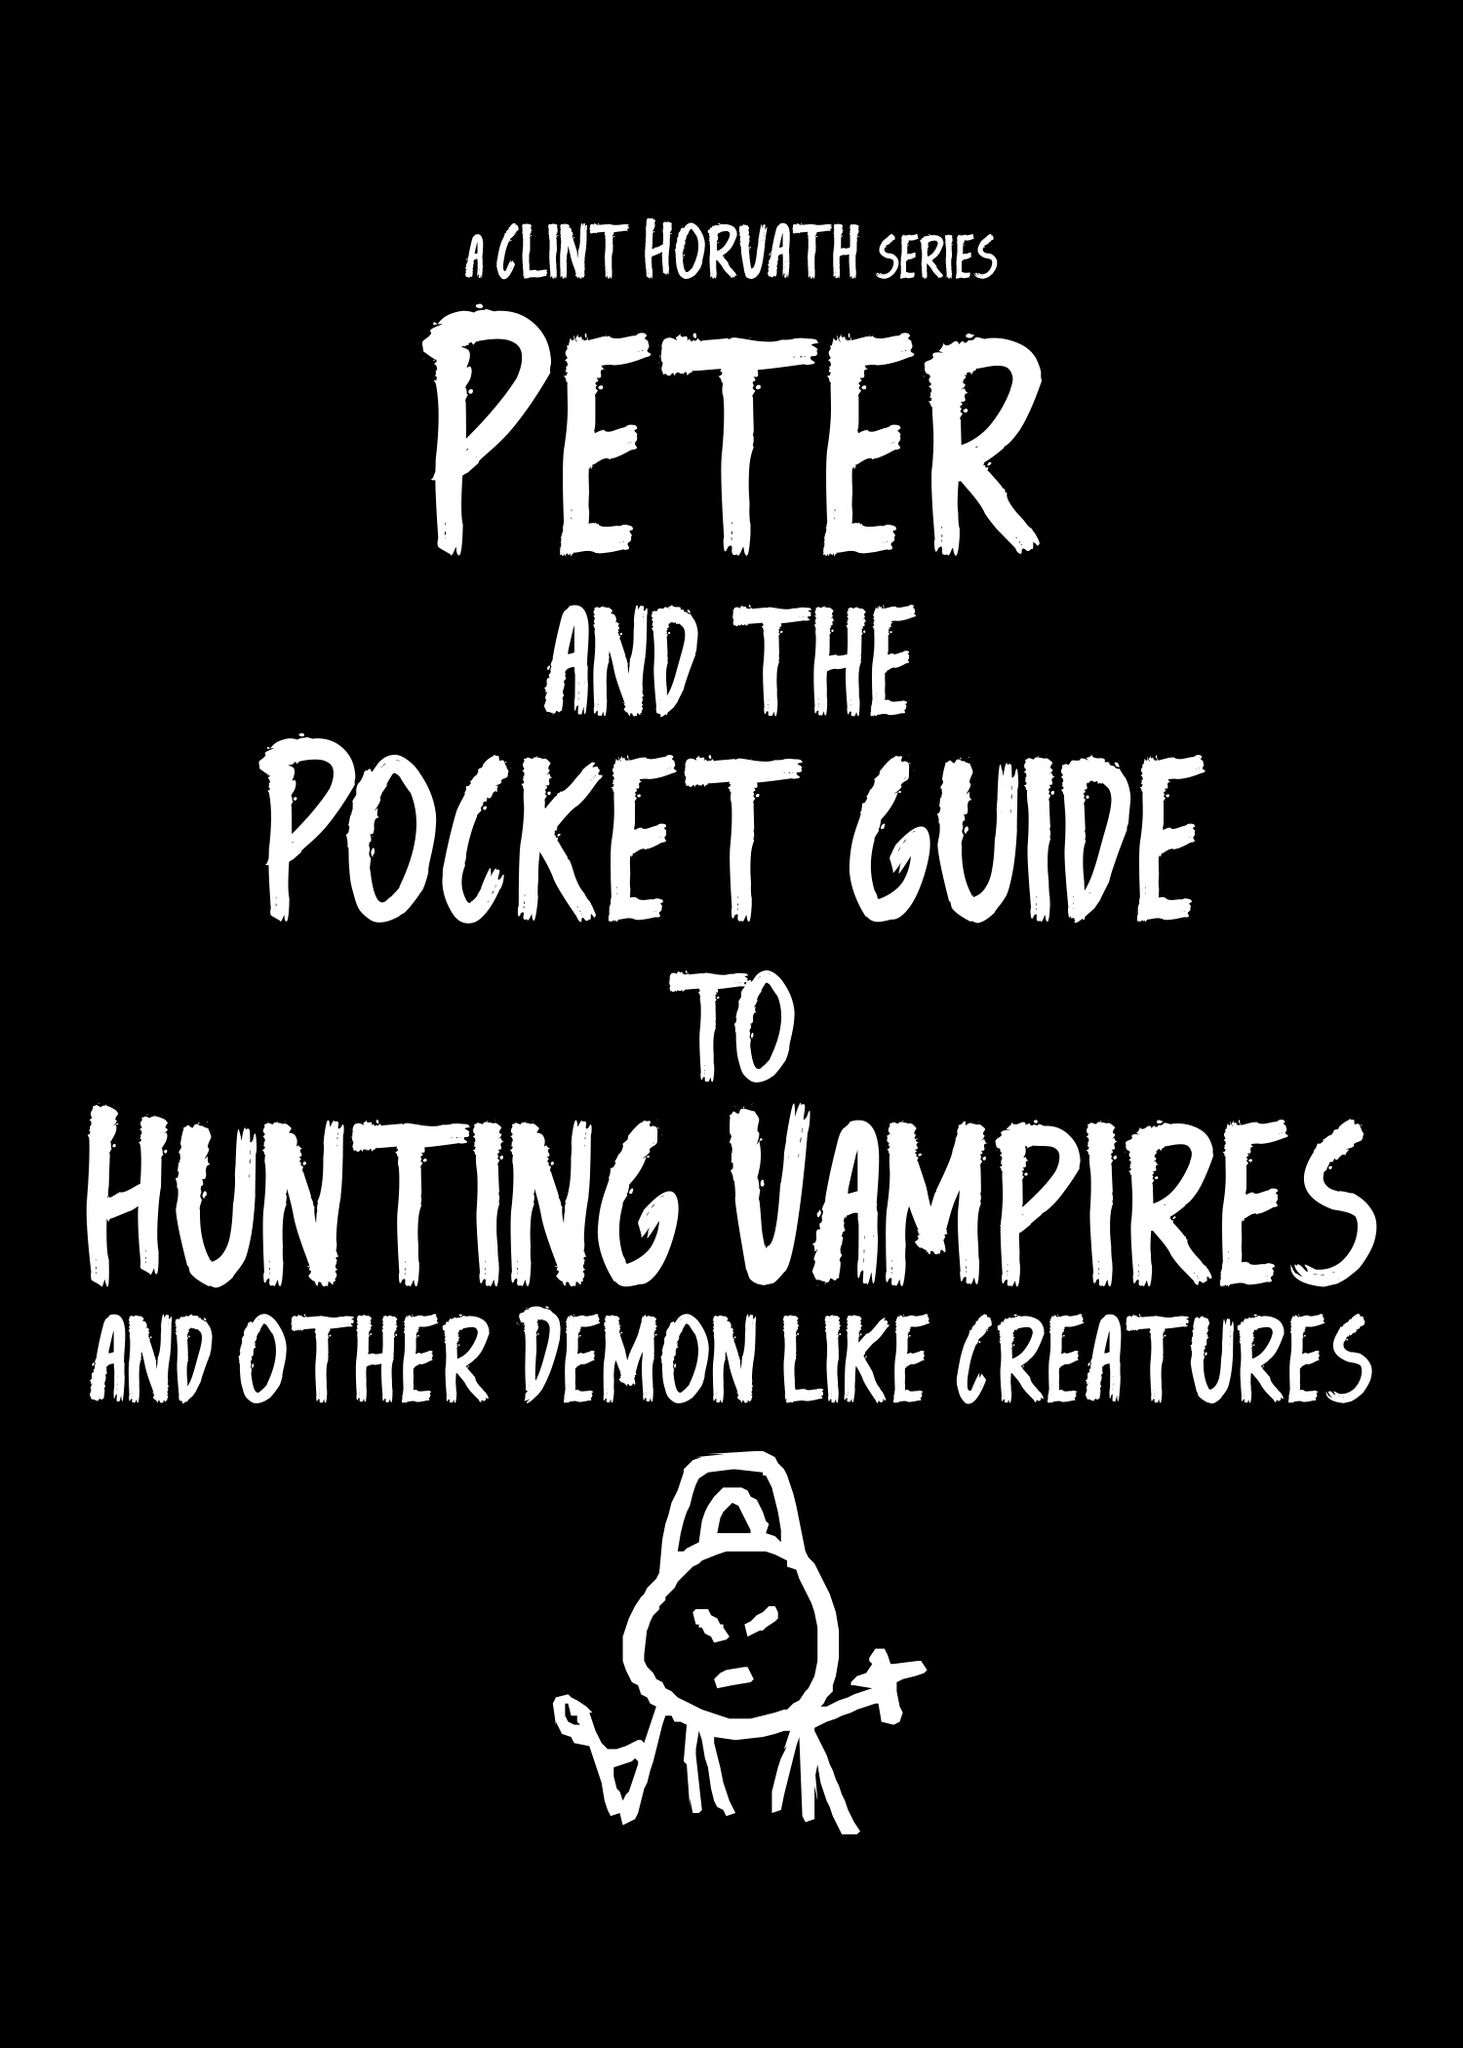 Peter and the Pocket Guide to Hunting Vampires and Other Demon Like Creatures